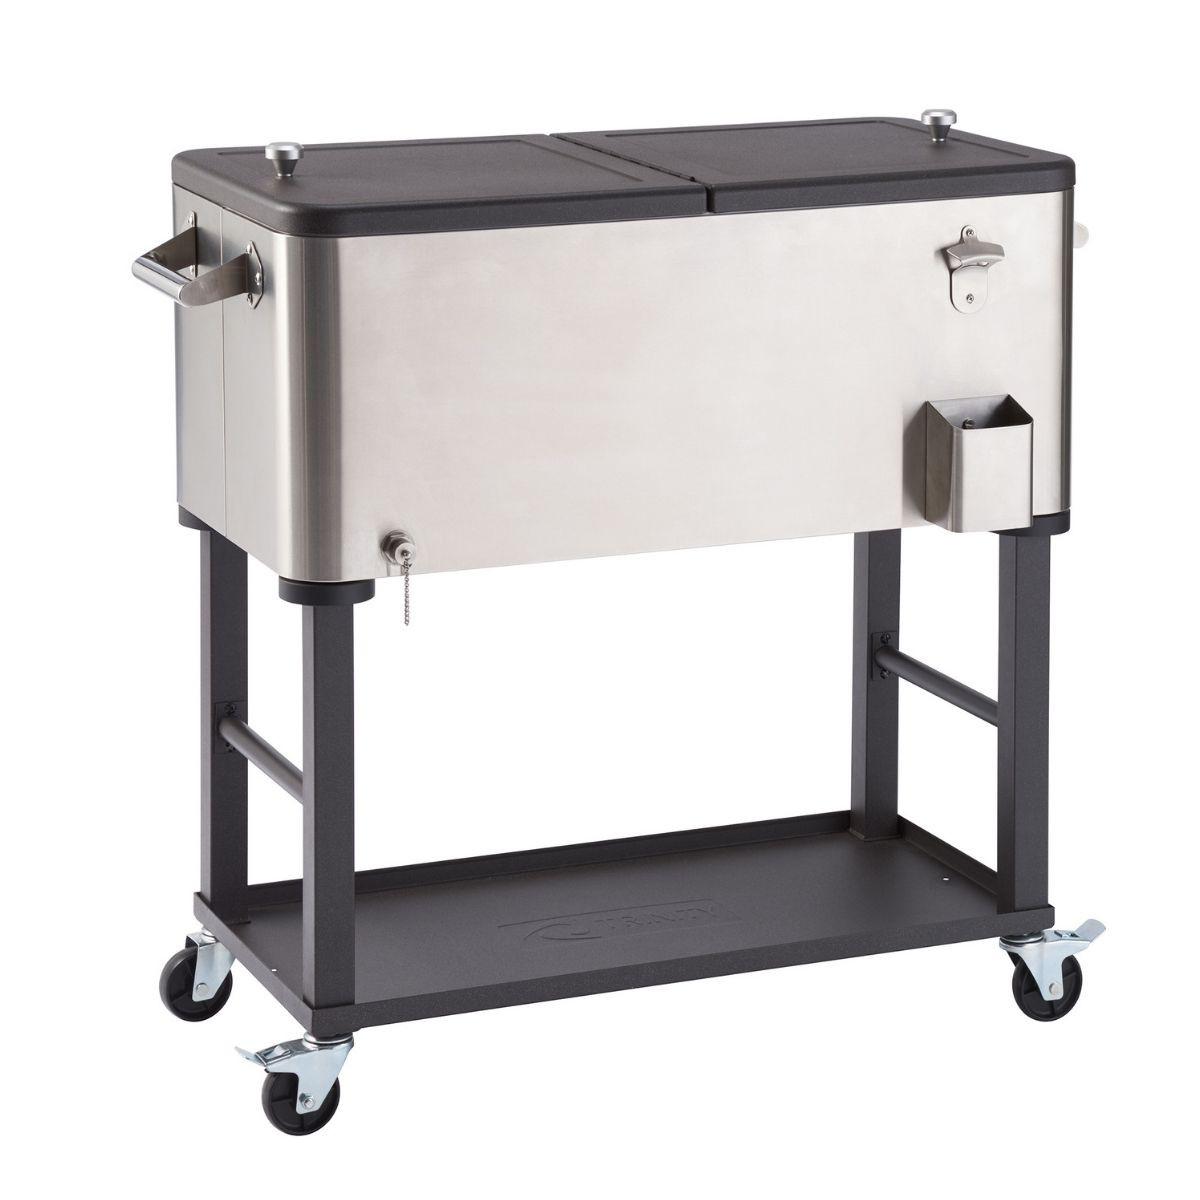 Txk-0803 80 Qt. Stainless Steel Cooler With Detachable Tub - 35.75 X 36 X 18.5 In.